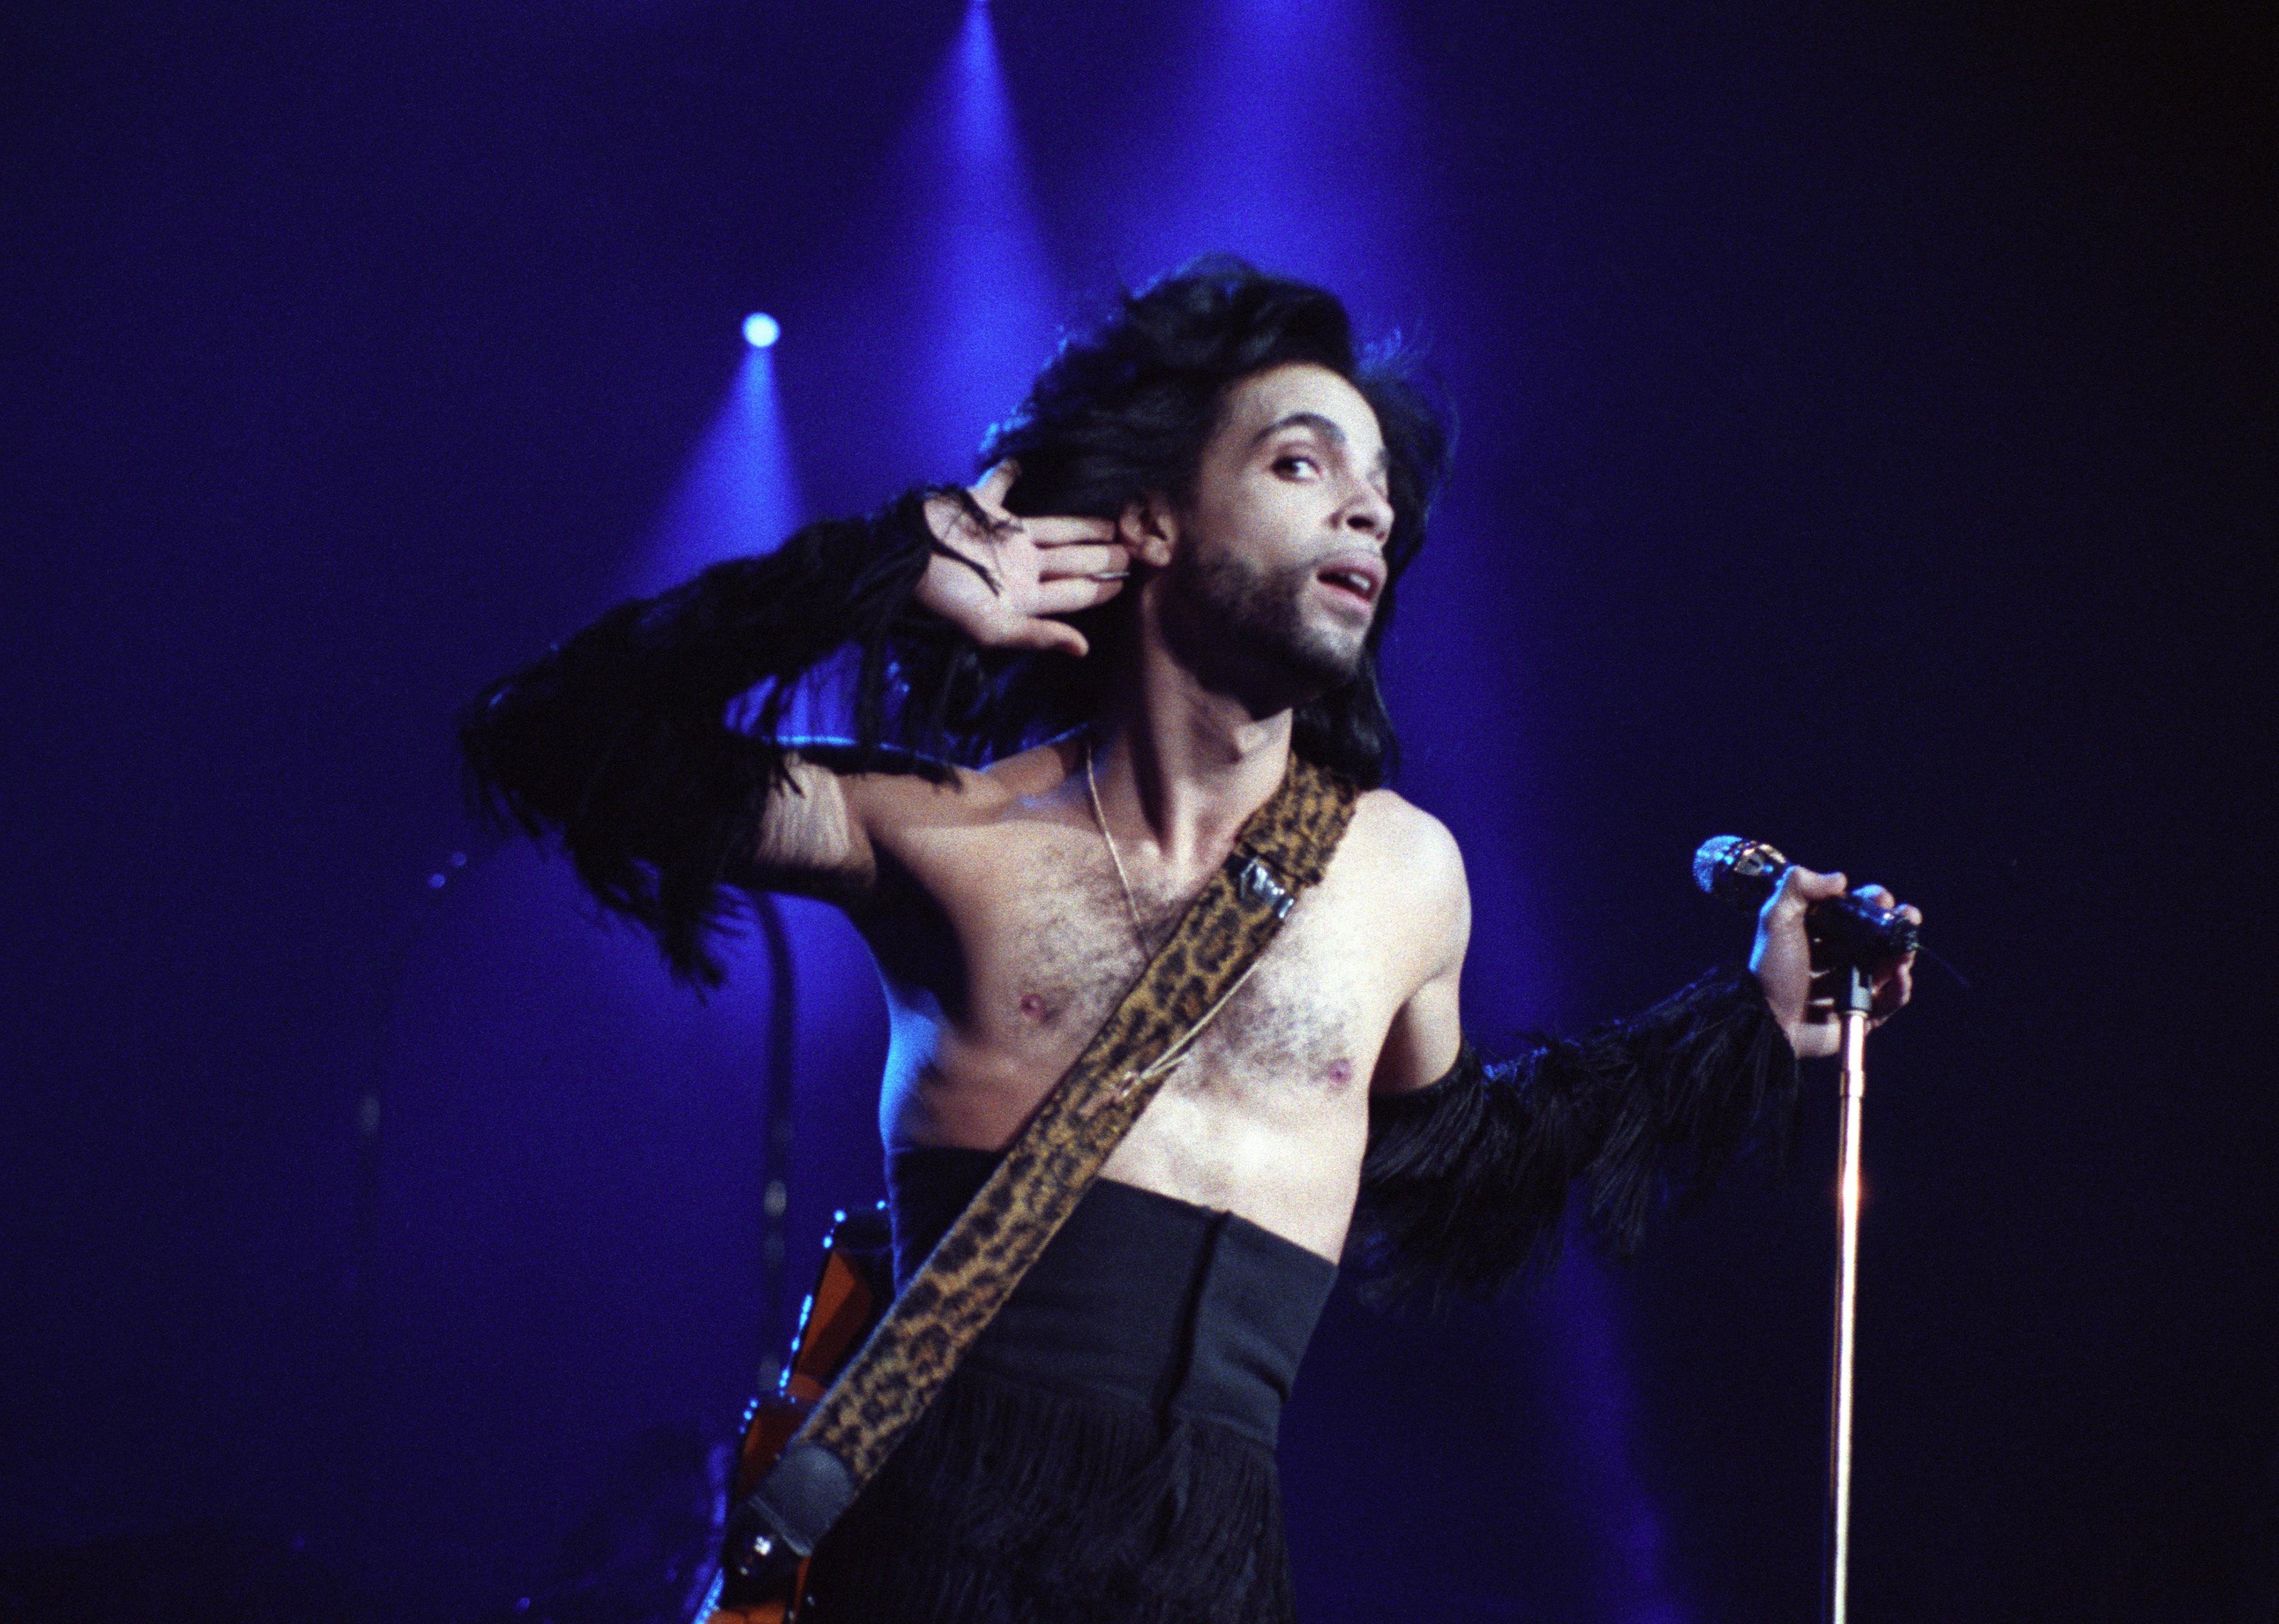 Prince performs during the Nude Tour at the St. Paul Civic Center Arena.